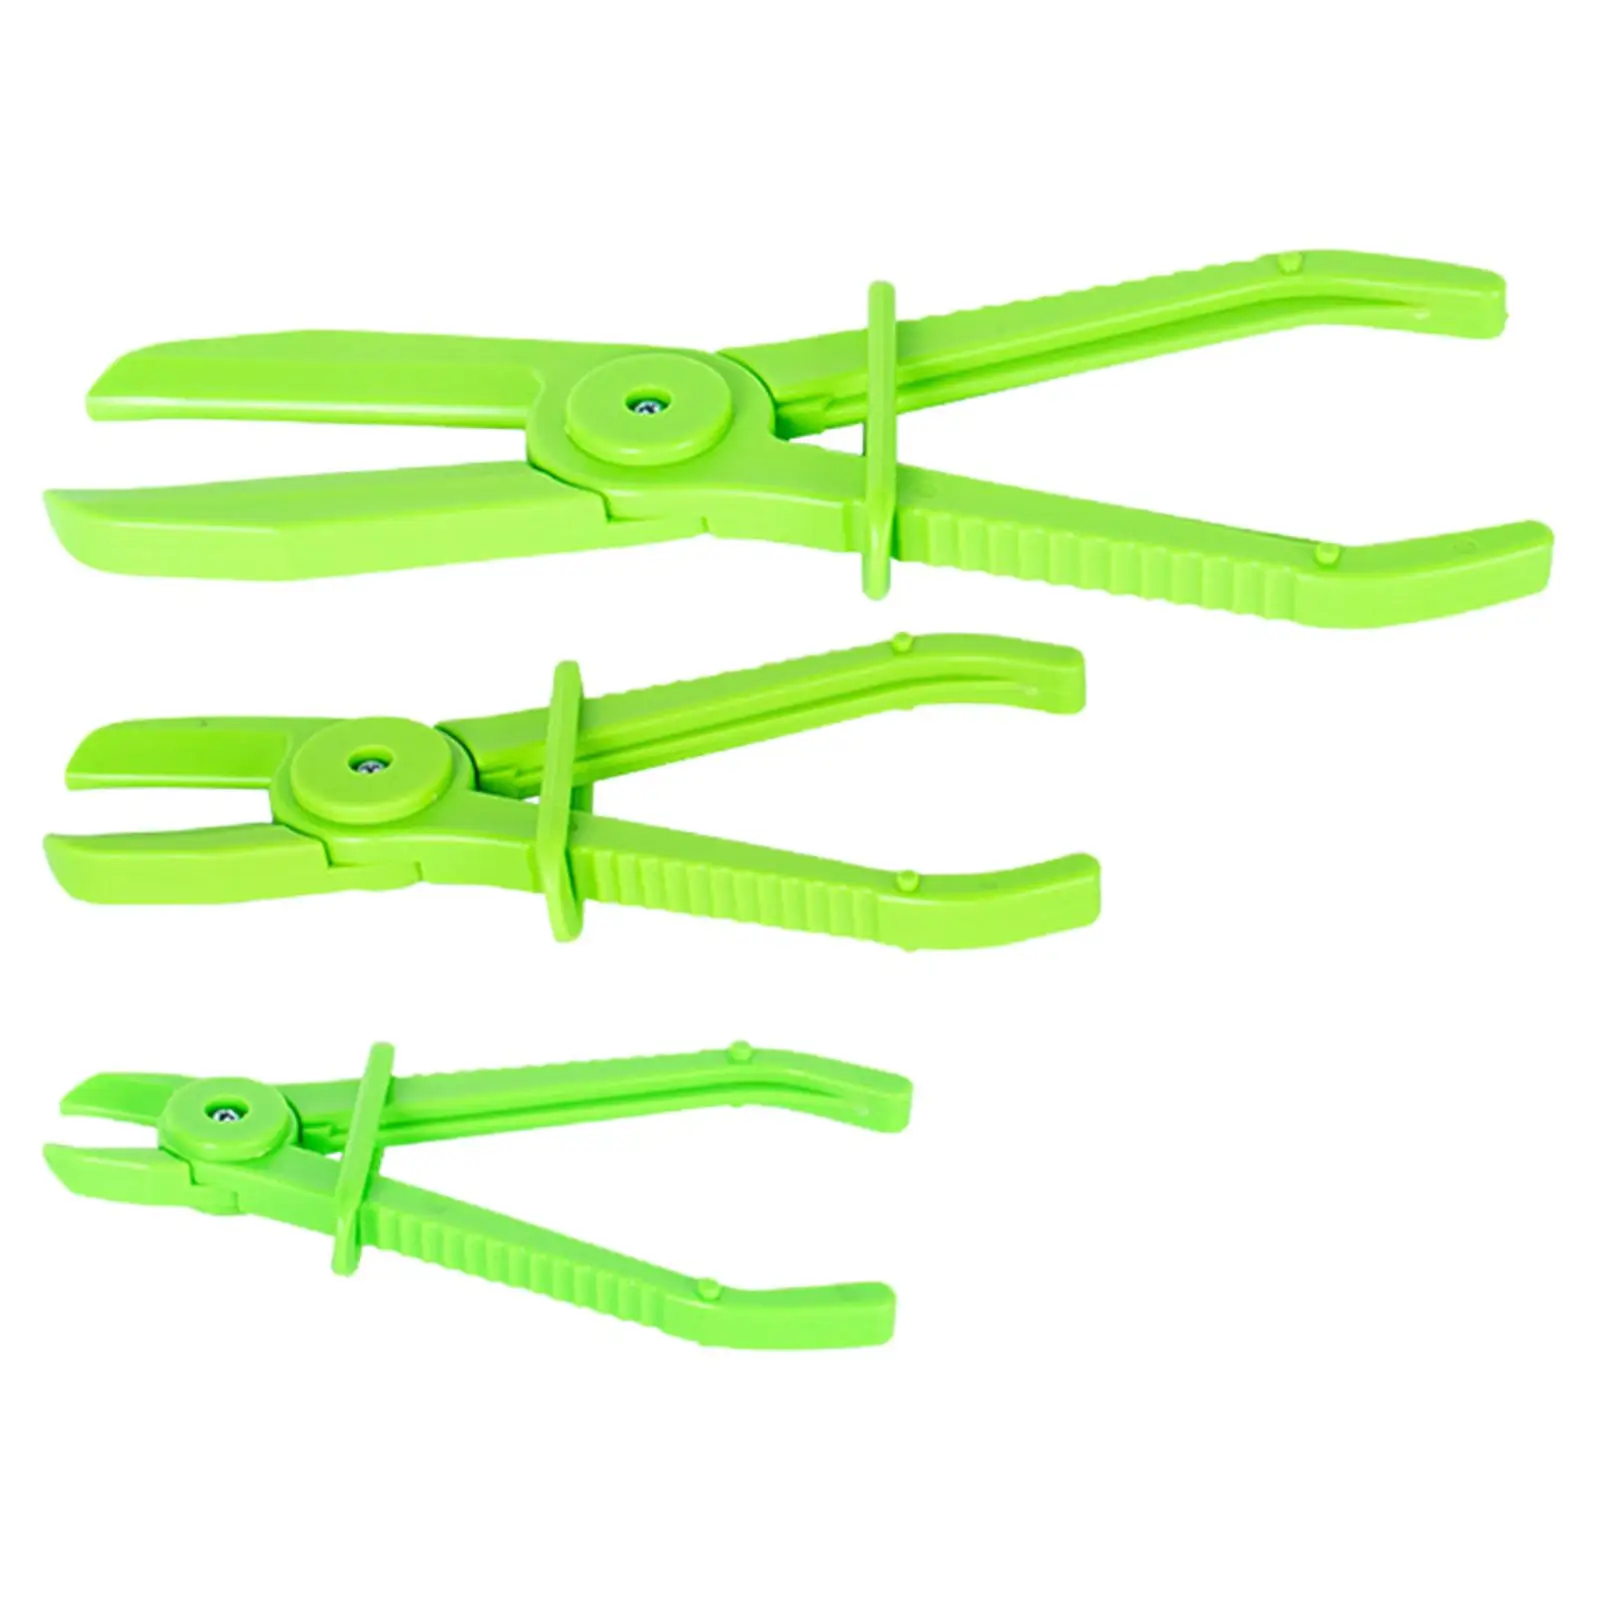 3x Hose Clamp Pinch Pliers 1/2